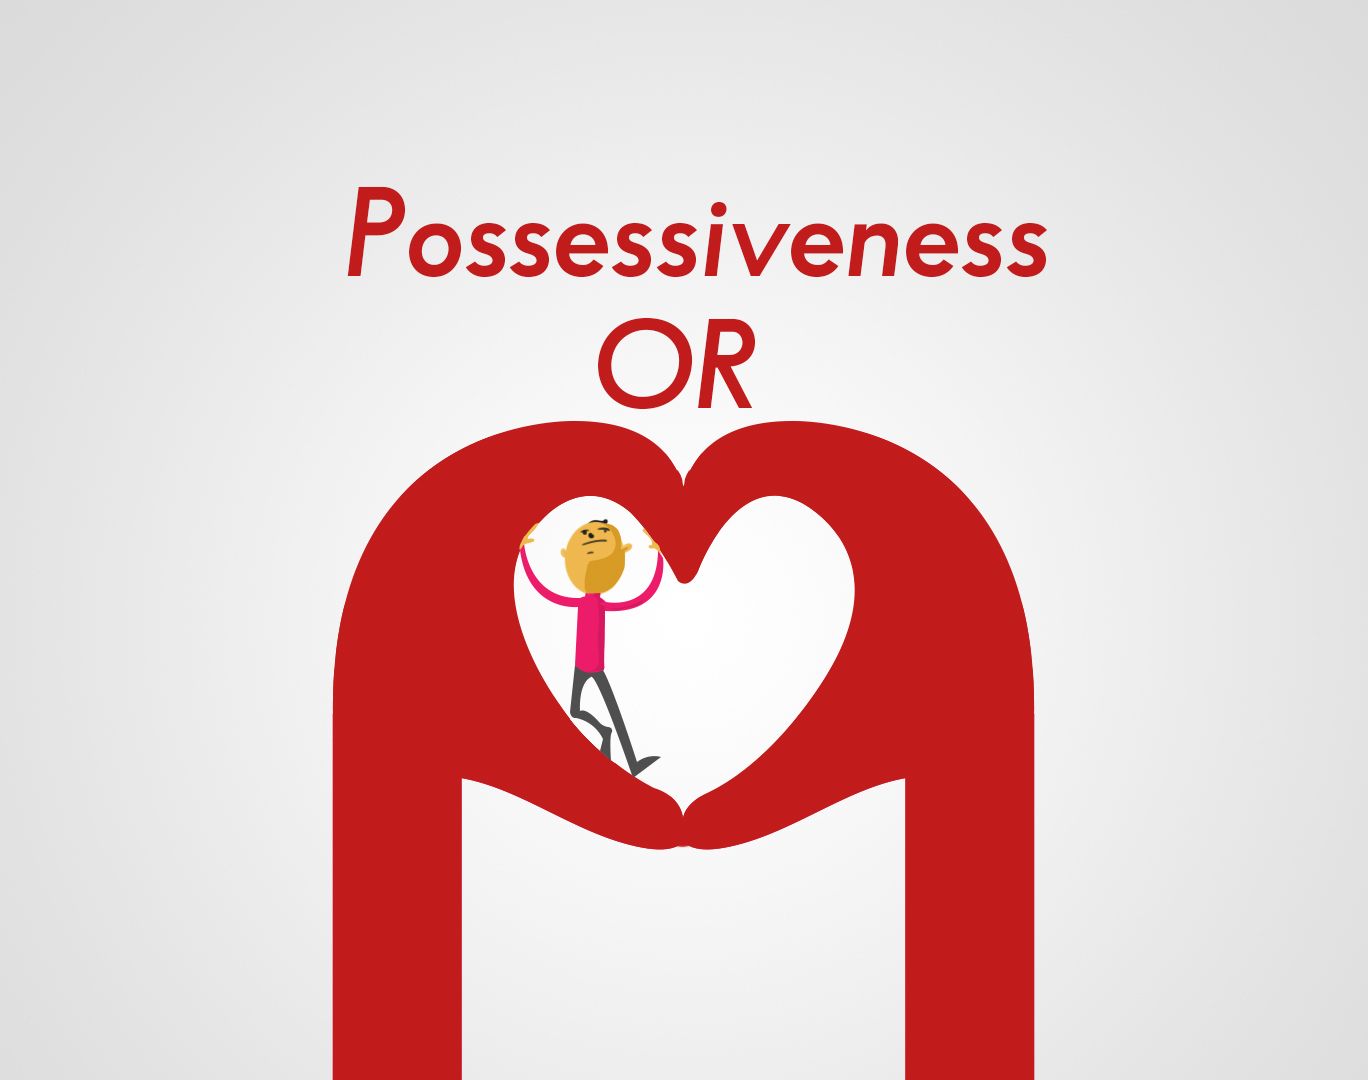 How To Deal With Owner Possessiveness In Dogs?